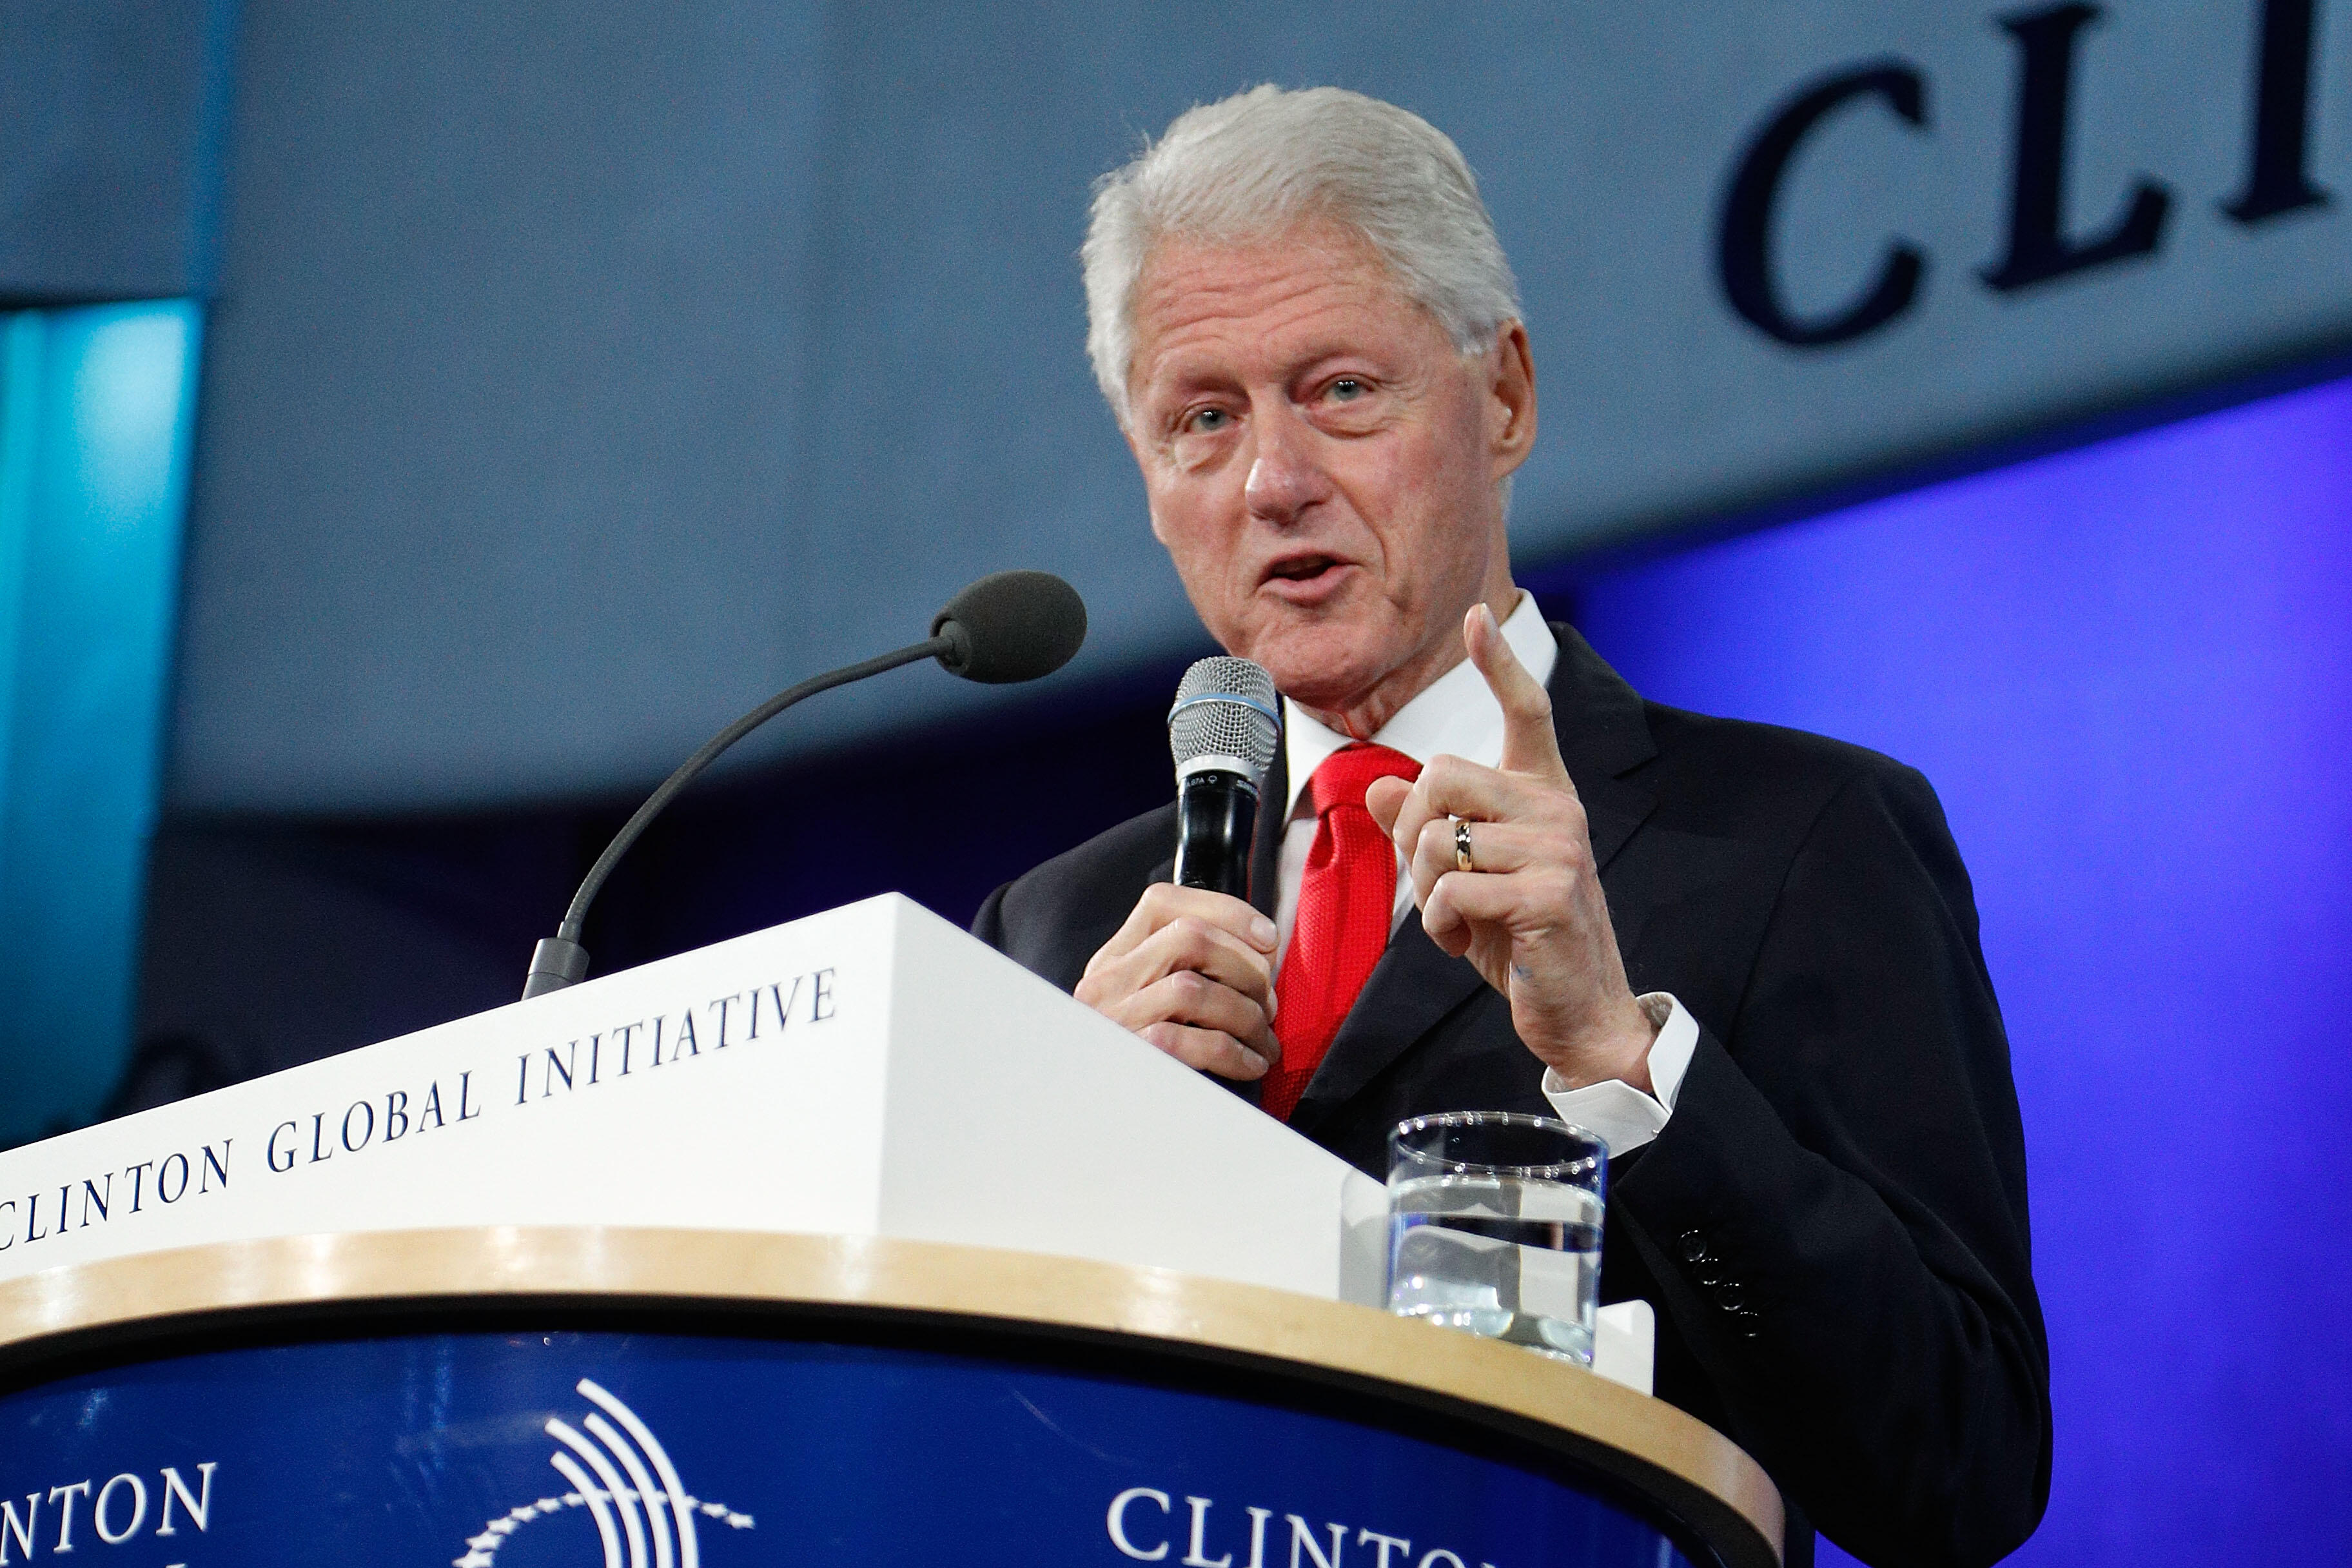 NEW YORK, NY - SEPTEMBER 21:  Bill Clinton gives a farewell speech to the Clinton Global Initiative 2016 Annual Meeting at Sheraton New York Times Square on September 21, 2016 in New York City.  (Photo by Taylor Hill/WireImage)